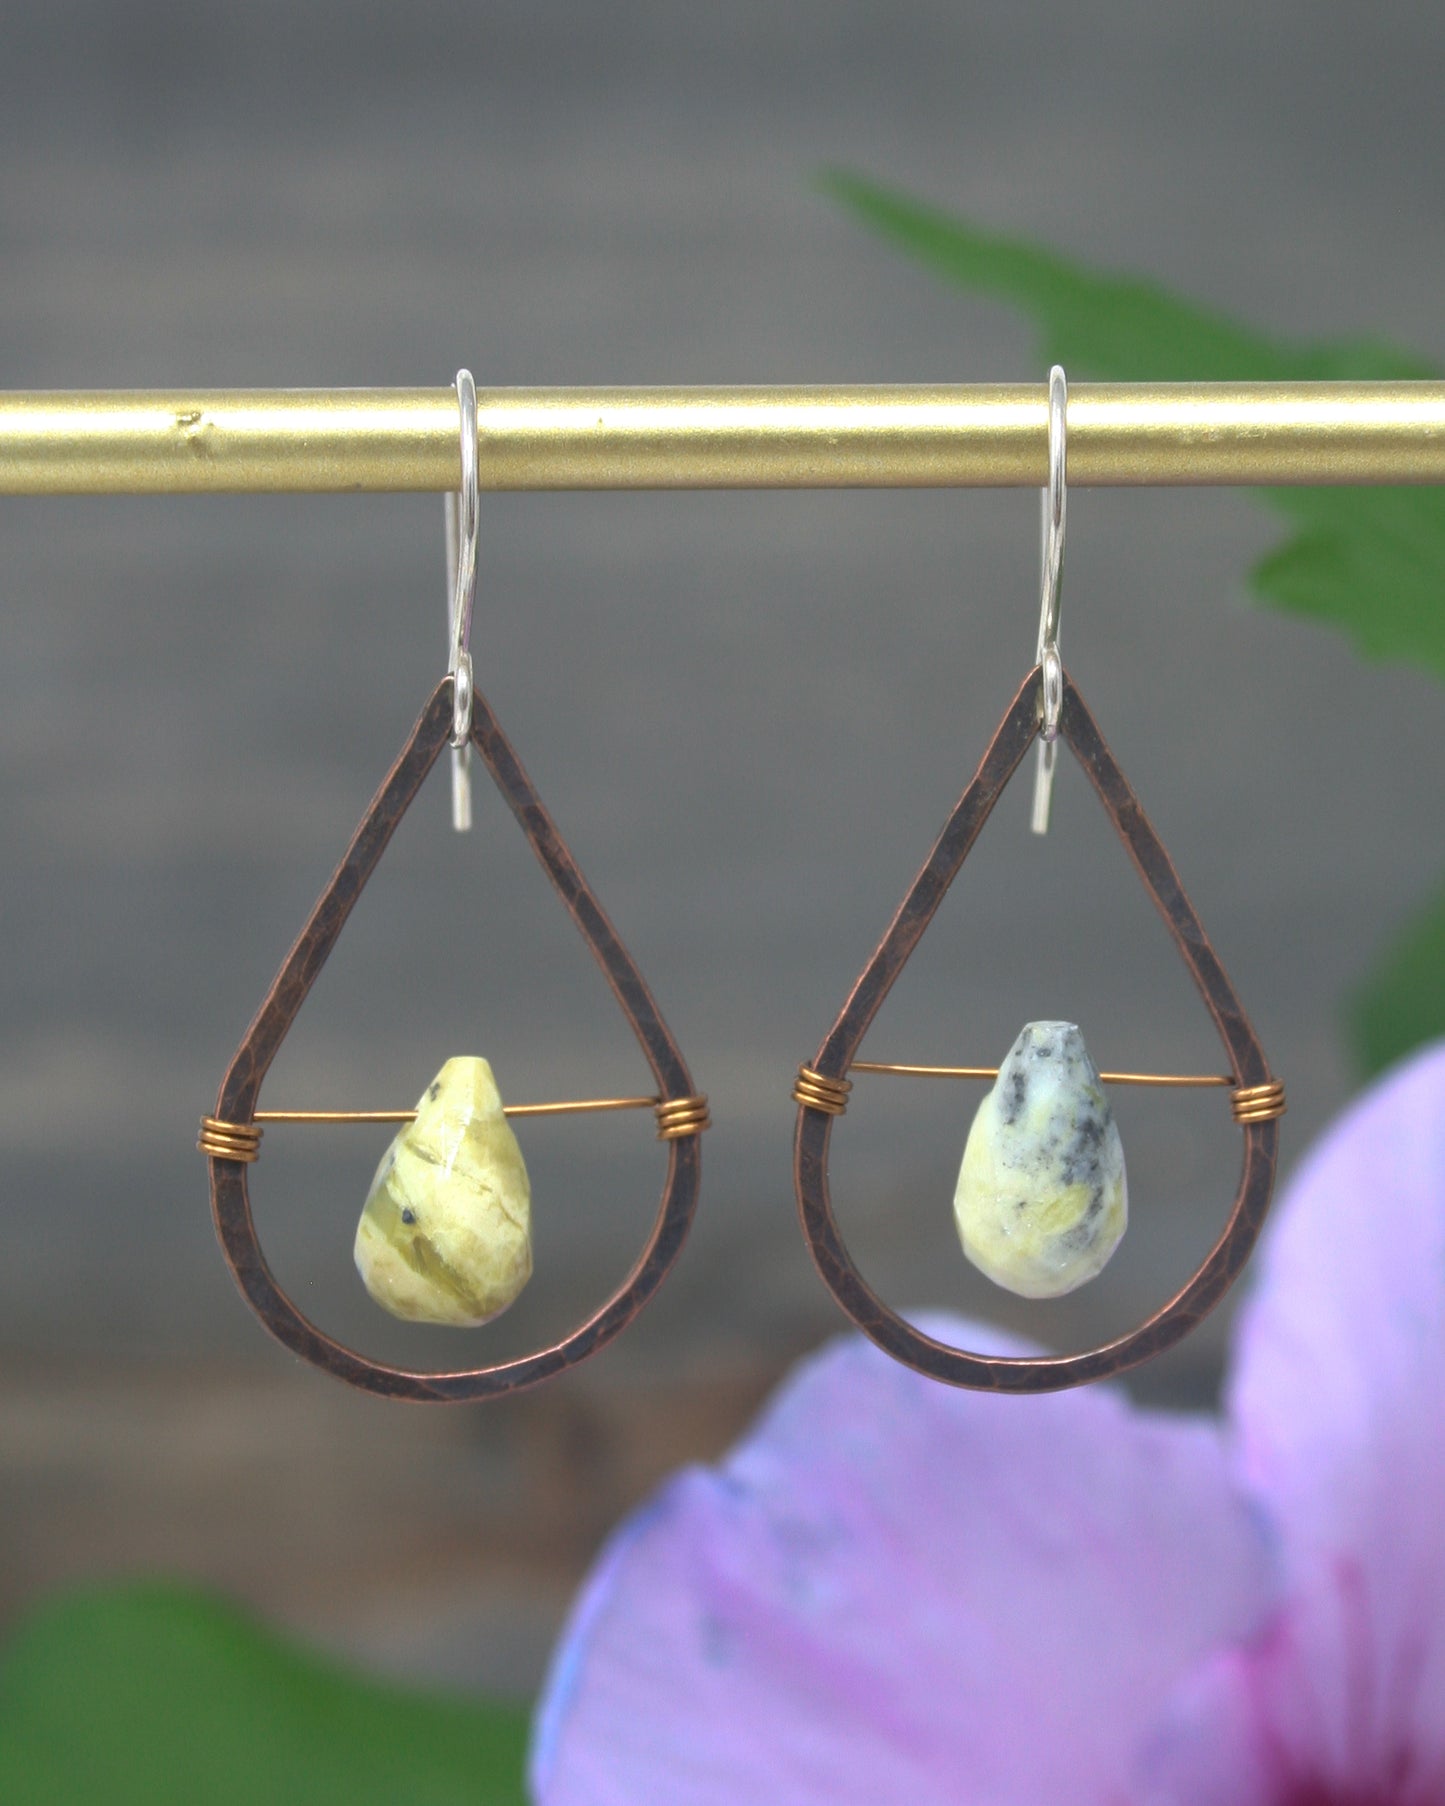 a pair of earrings hanging from a hook